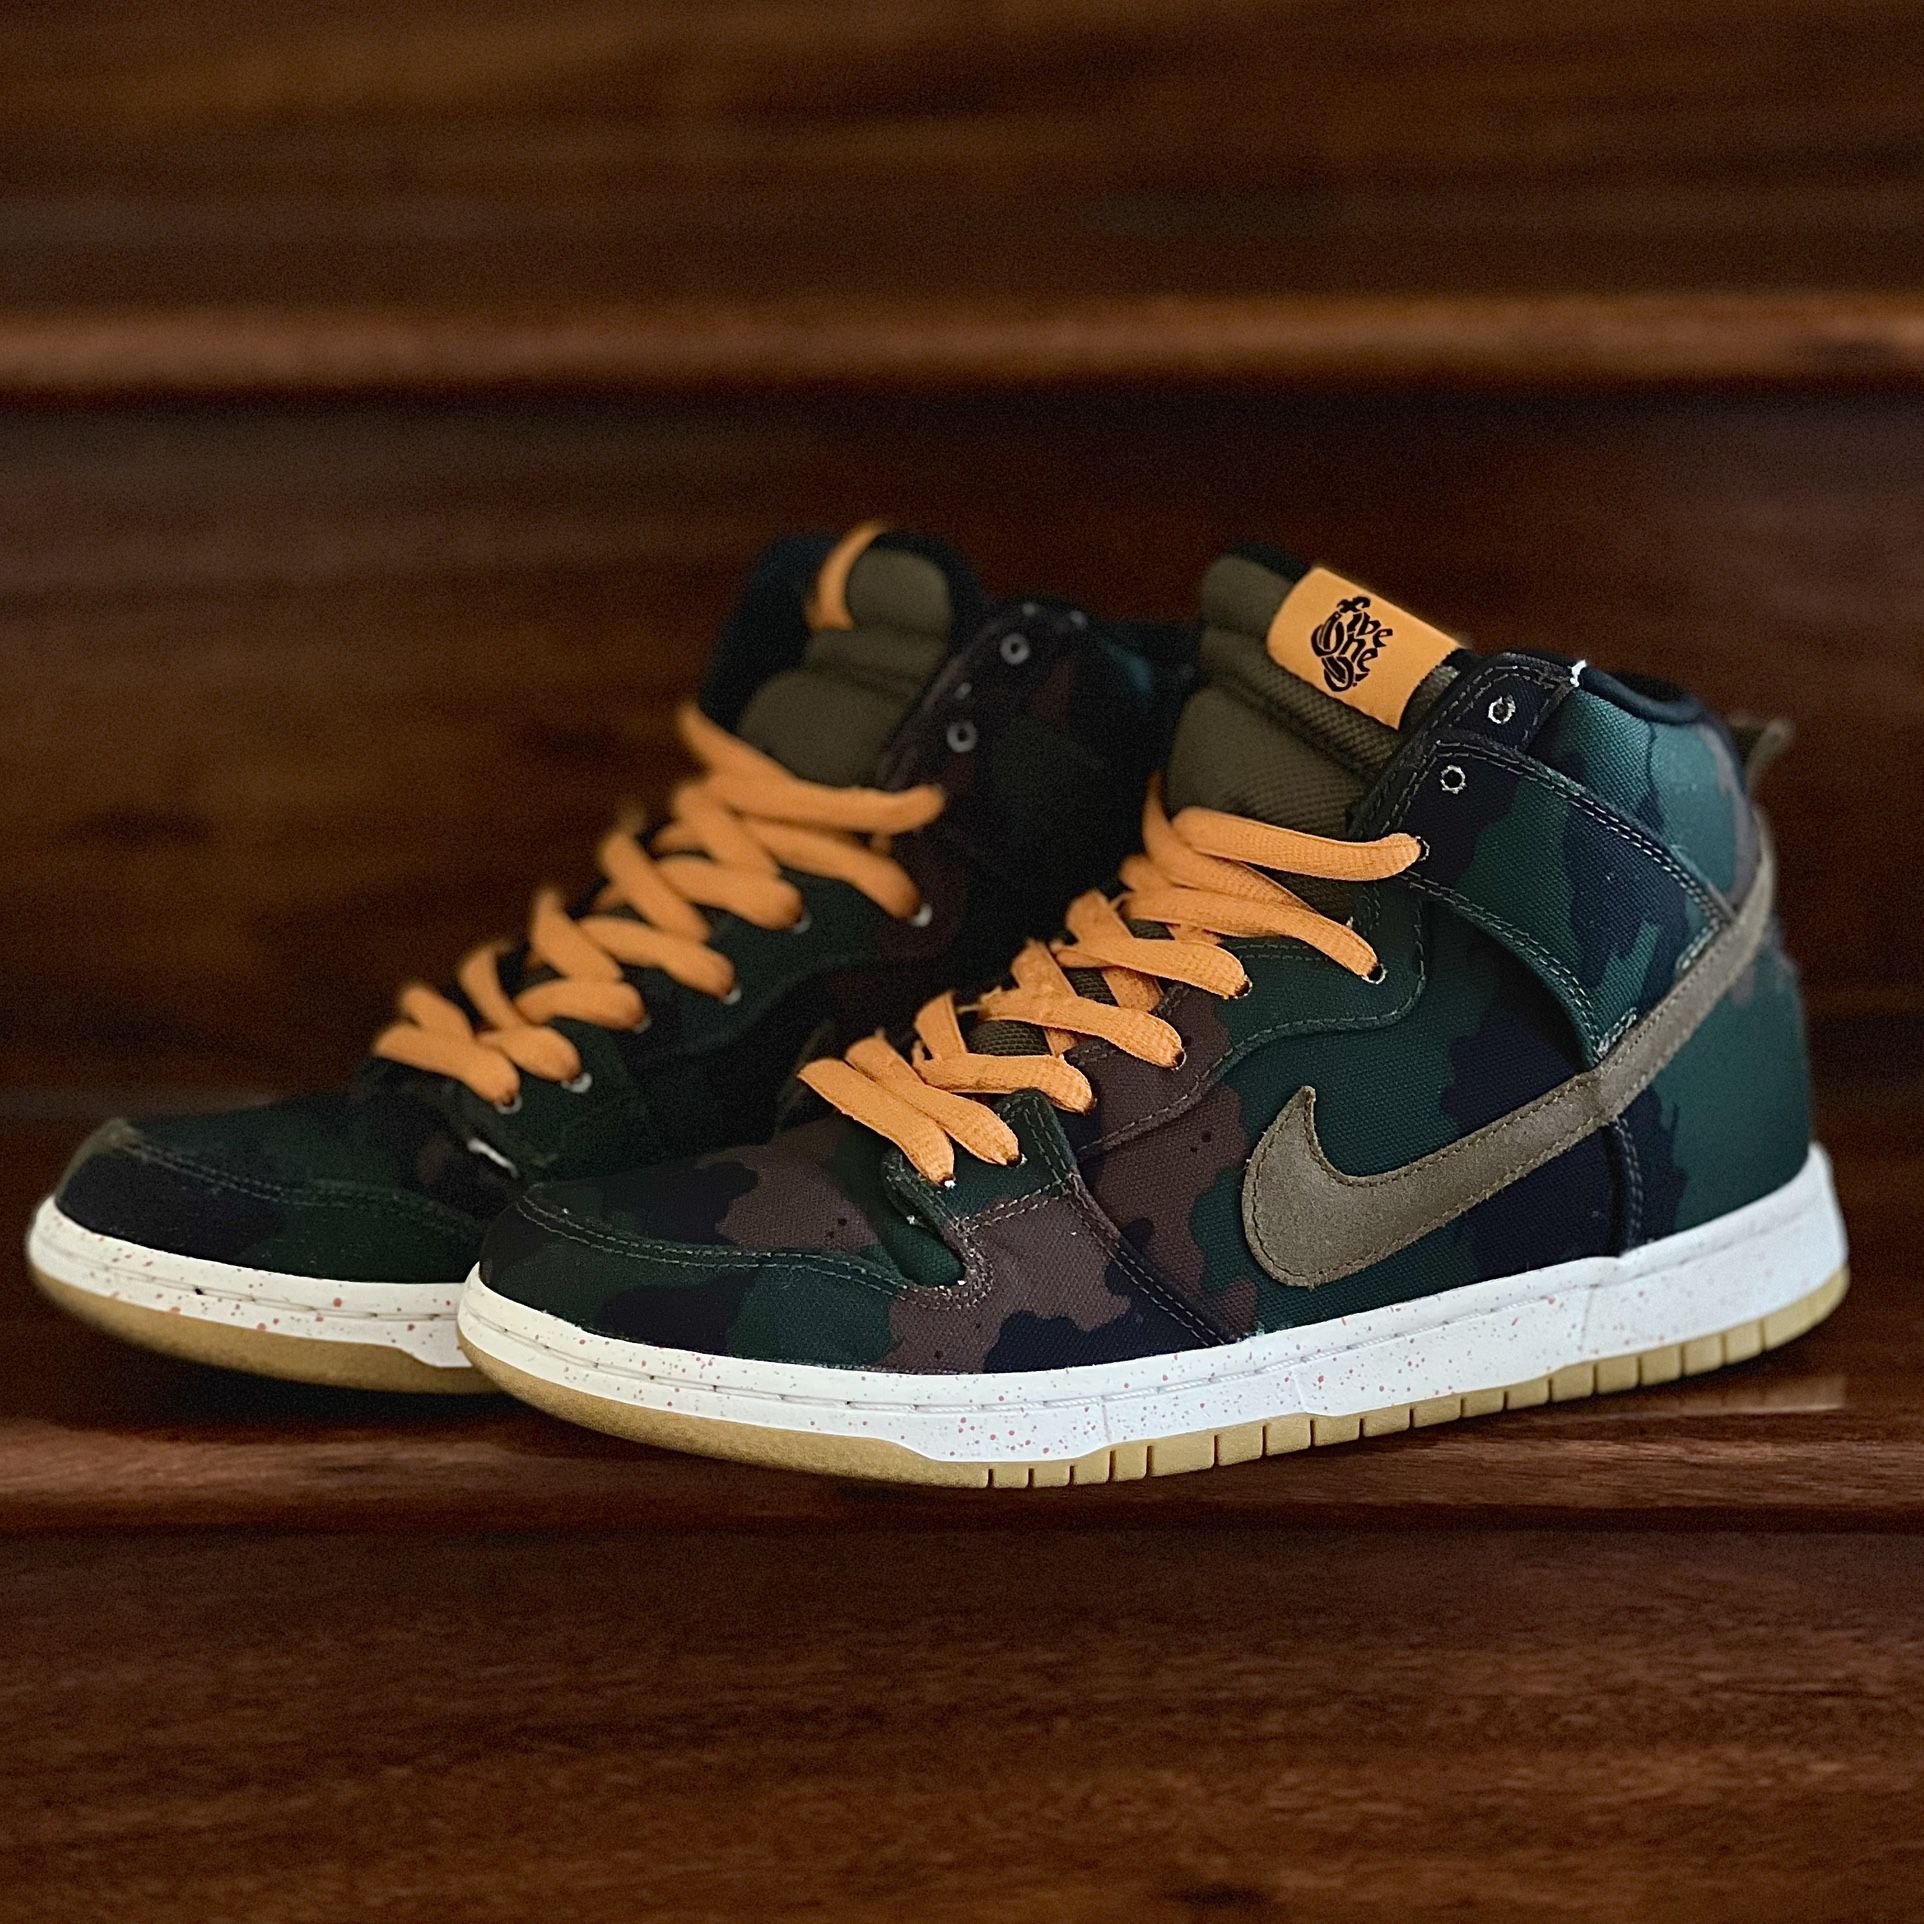 Nike SB Dunk High FiveOneO Camo size 9 for Sale in San Diego